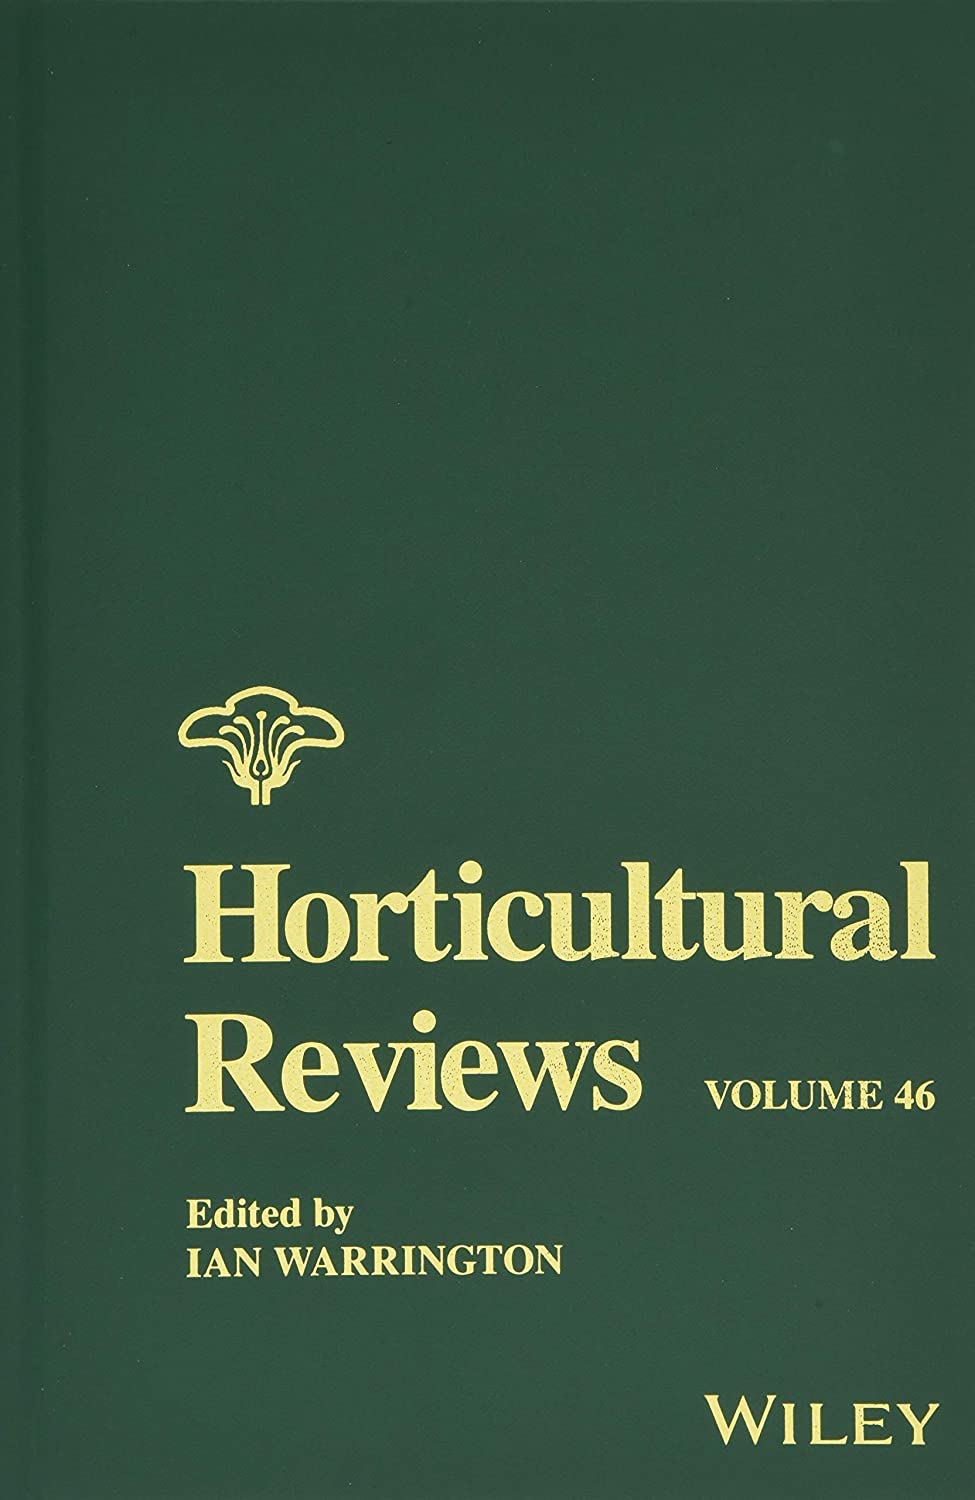 Horticultural Reviews, Volume 46